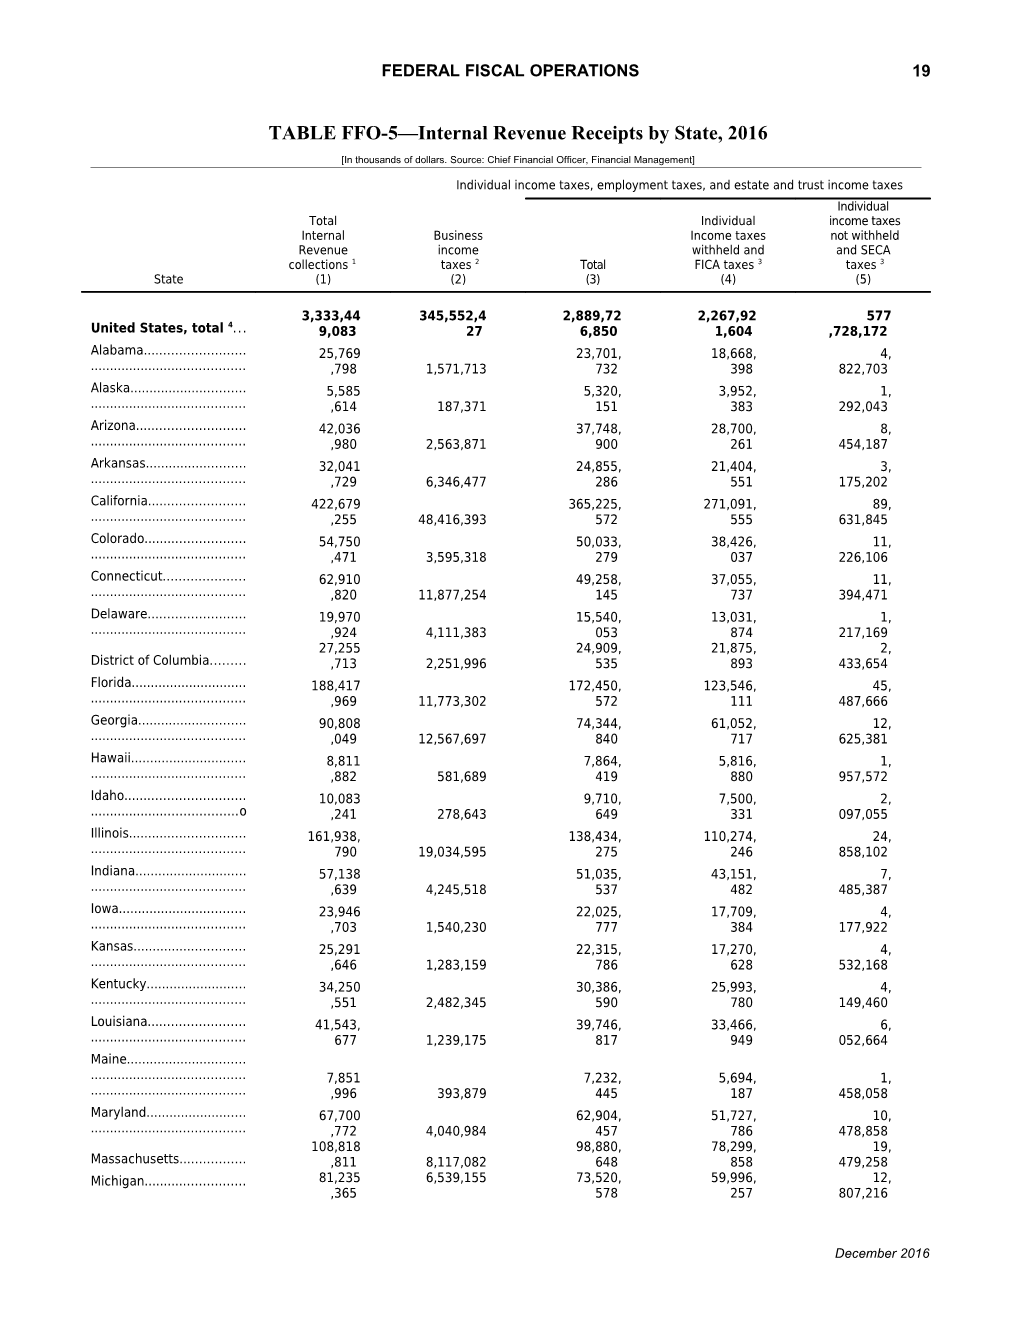 TABLE FFO-5 Internal Revenue Receipts by State,2016